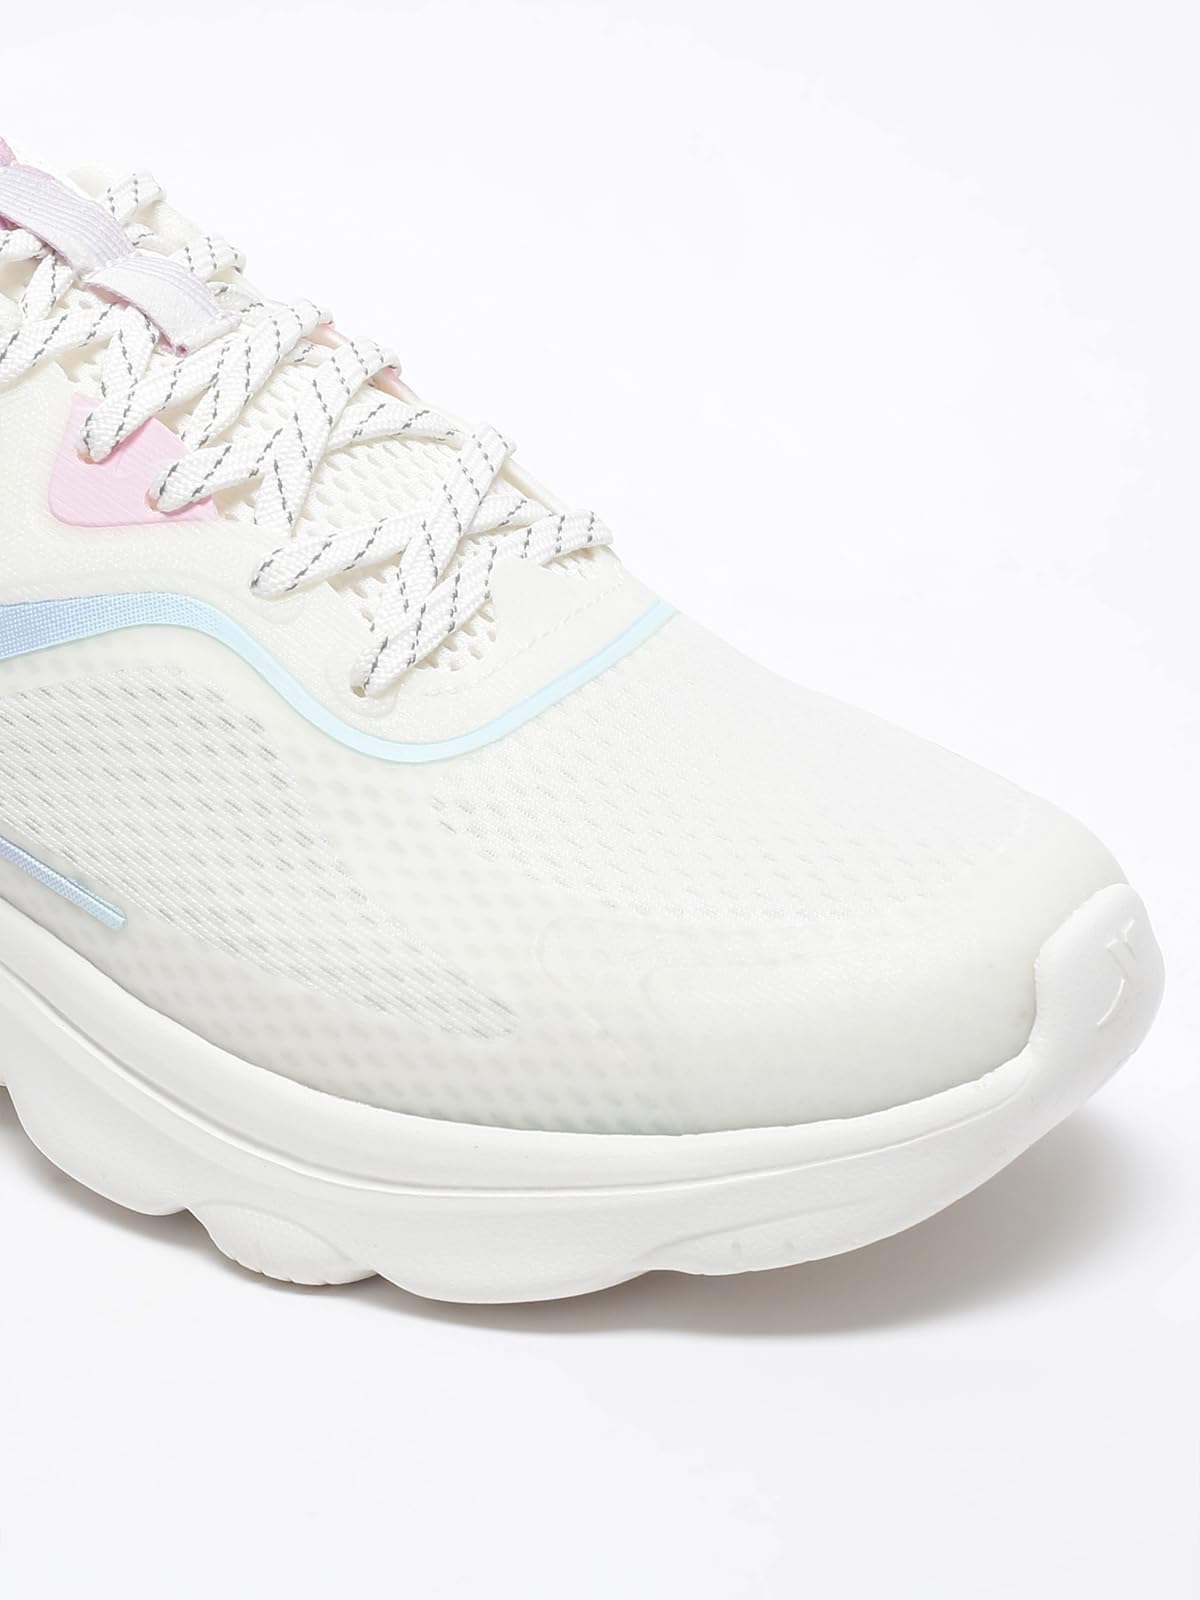 XTEP Canvas White,Ice Peach Running Shoes for Women Euro- 36